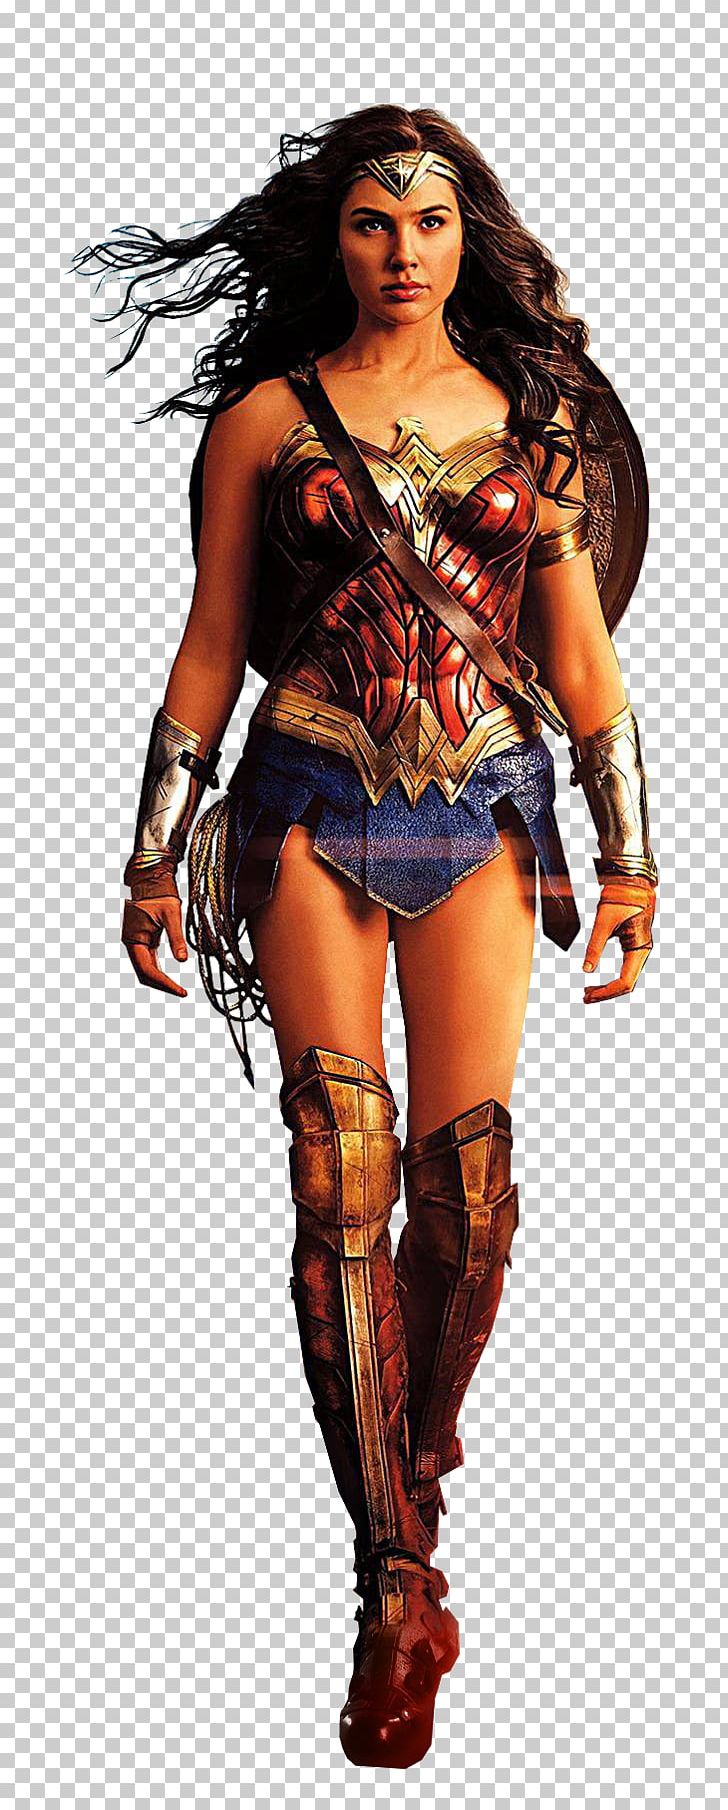 Diana Prince Hollywood Wonder Woman Gal Gadot Themyscira PNG, Clipart, Comic, Costume, Costume Design, Dc Extended Universe, Diana Prince Free PNG Download